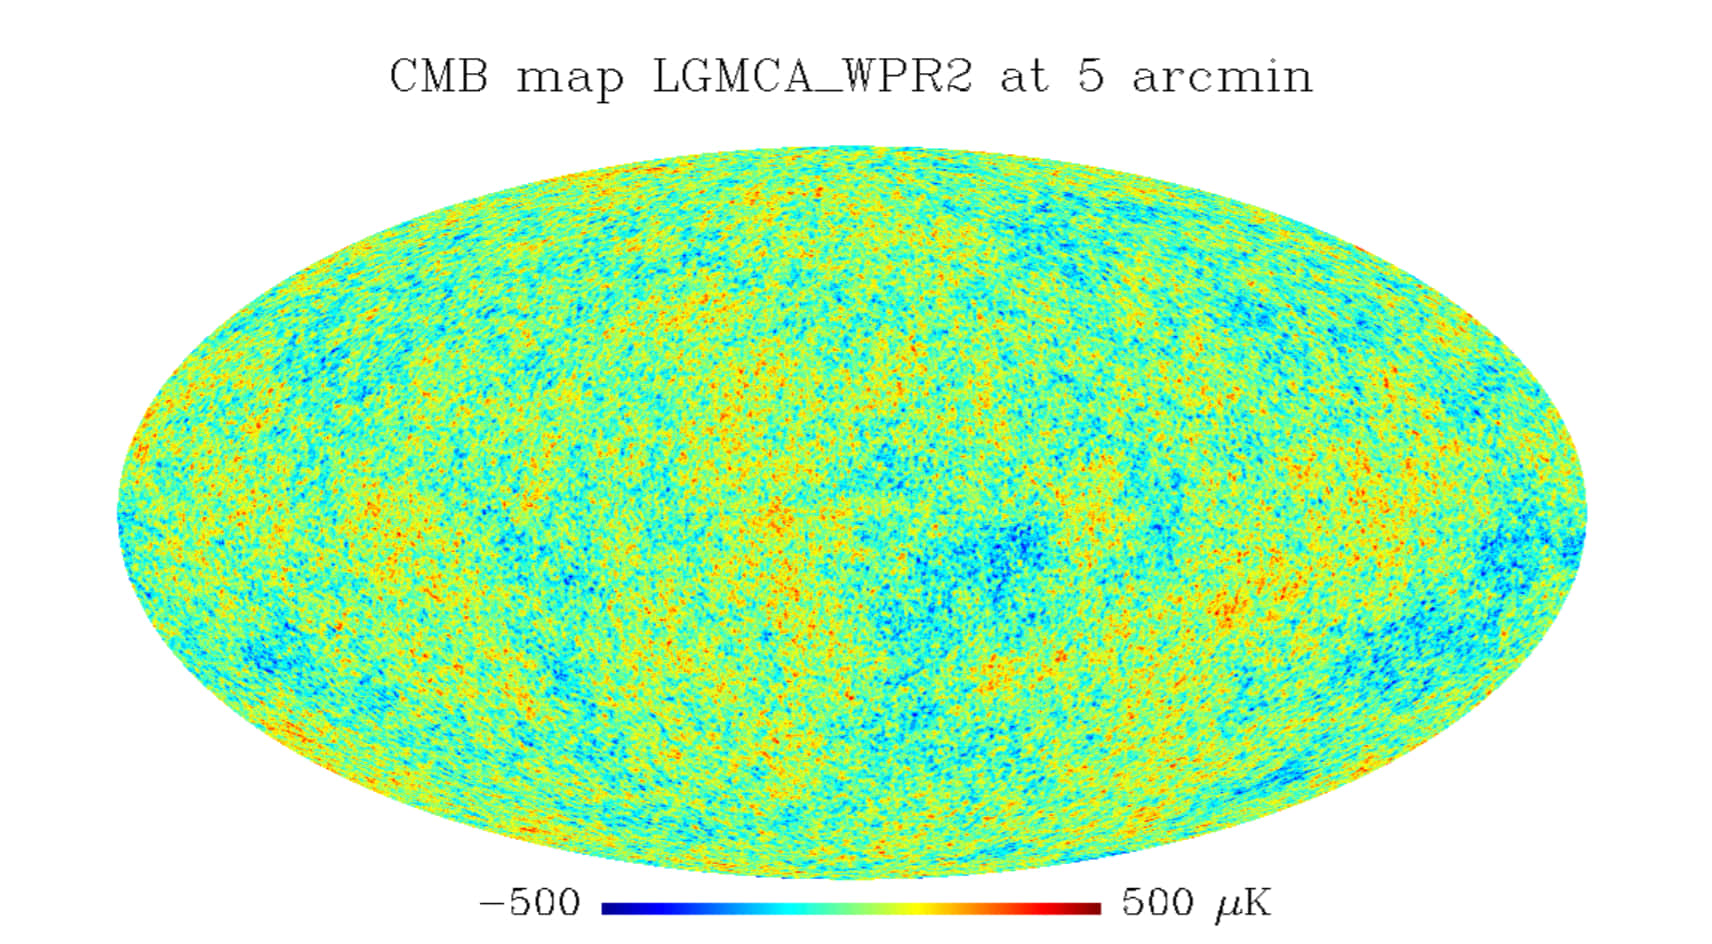 Known Universe Cosmic Microwave Background Radiation